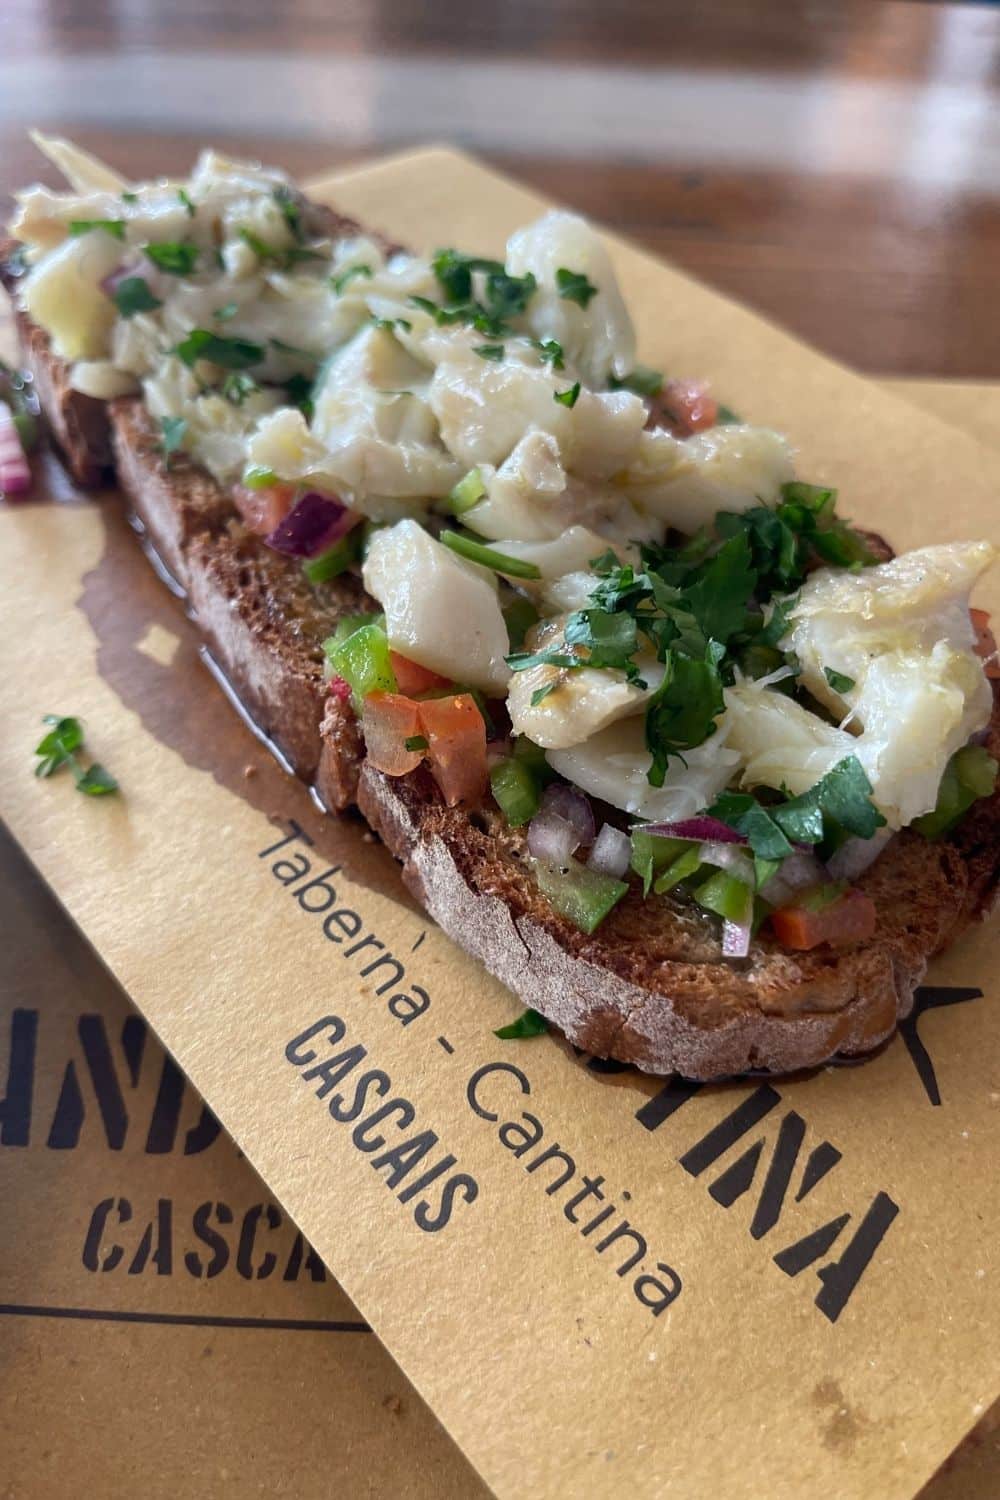 Artfully presented cod bruschetta on a rustic slice of bread, topped with diced vegetables and herbs, served on a paper with 'Taberna Clandestina Cascais' branding, indicating a fresh and local dish.